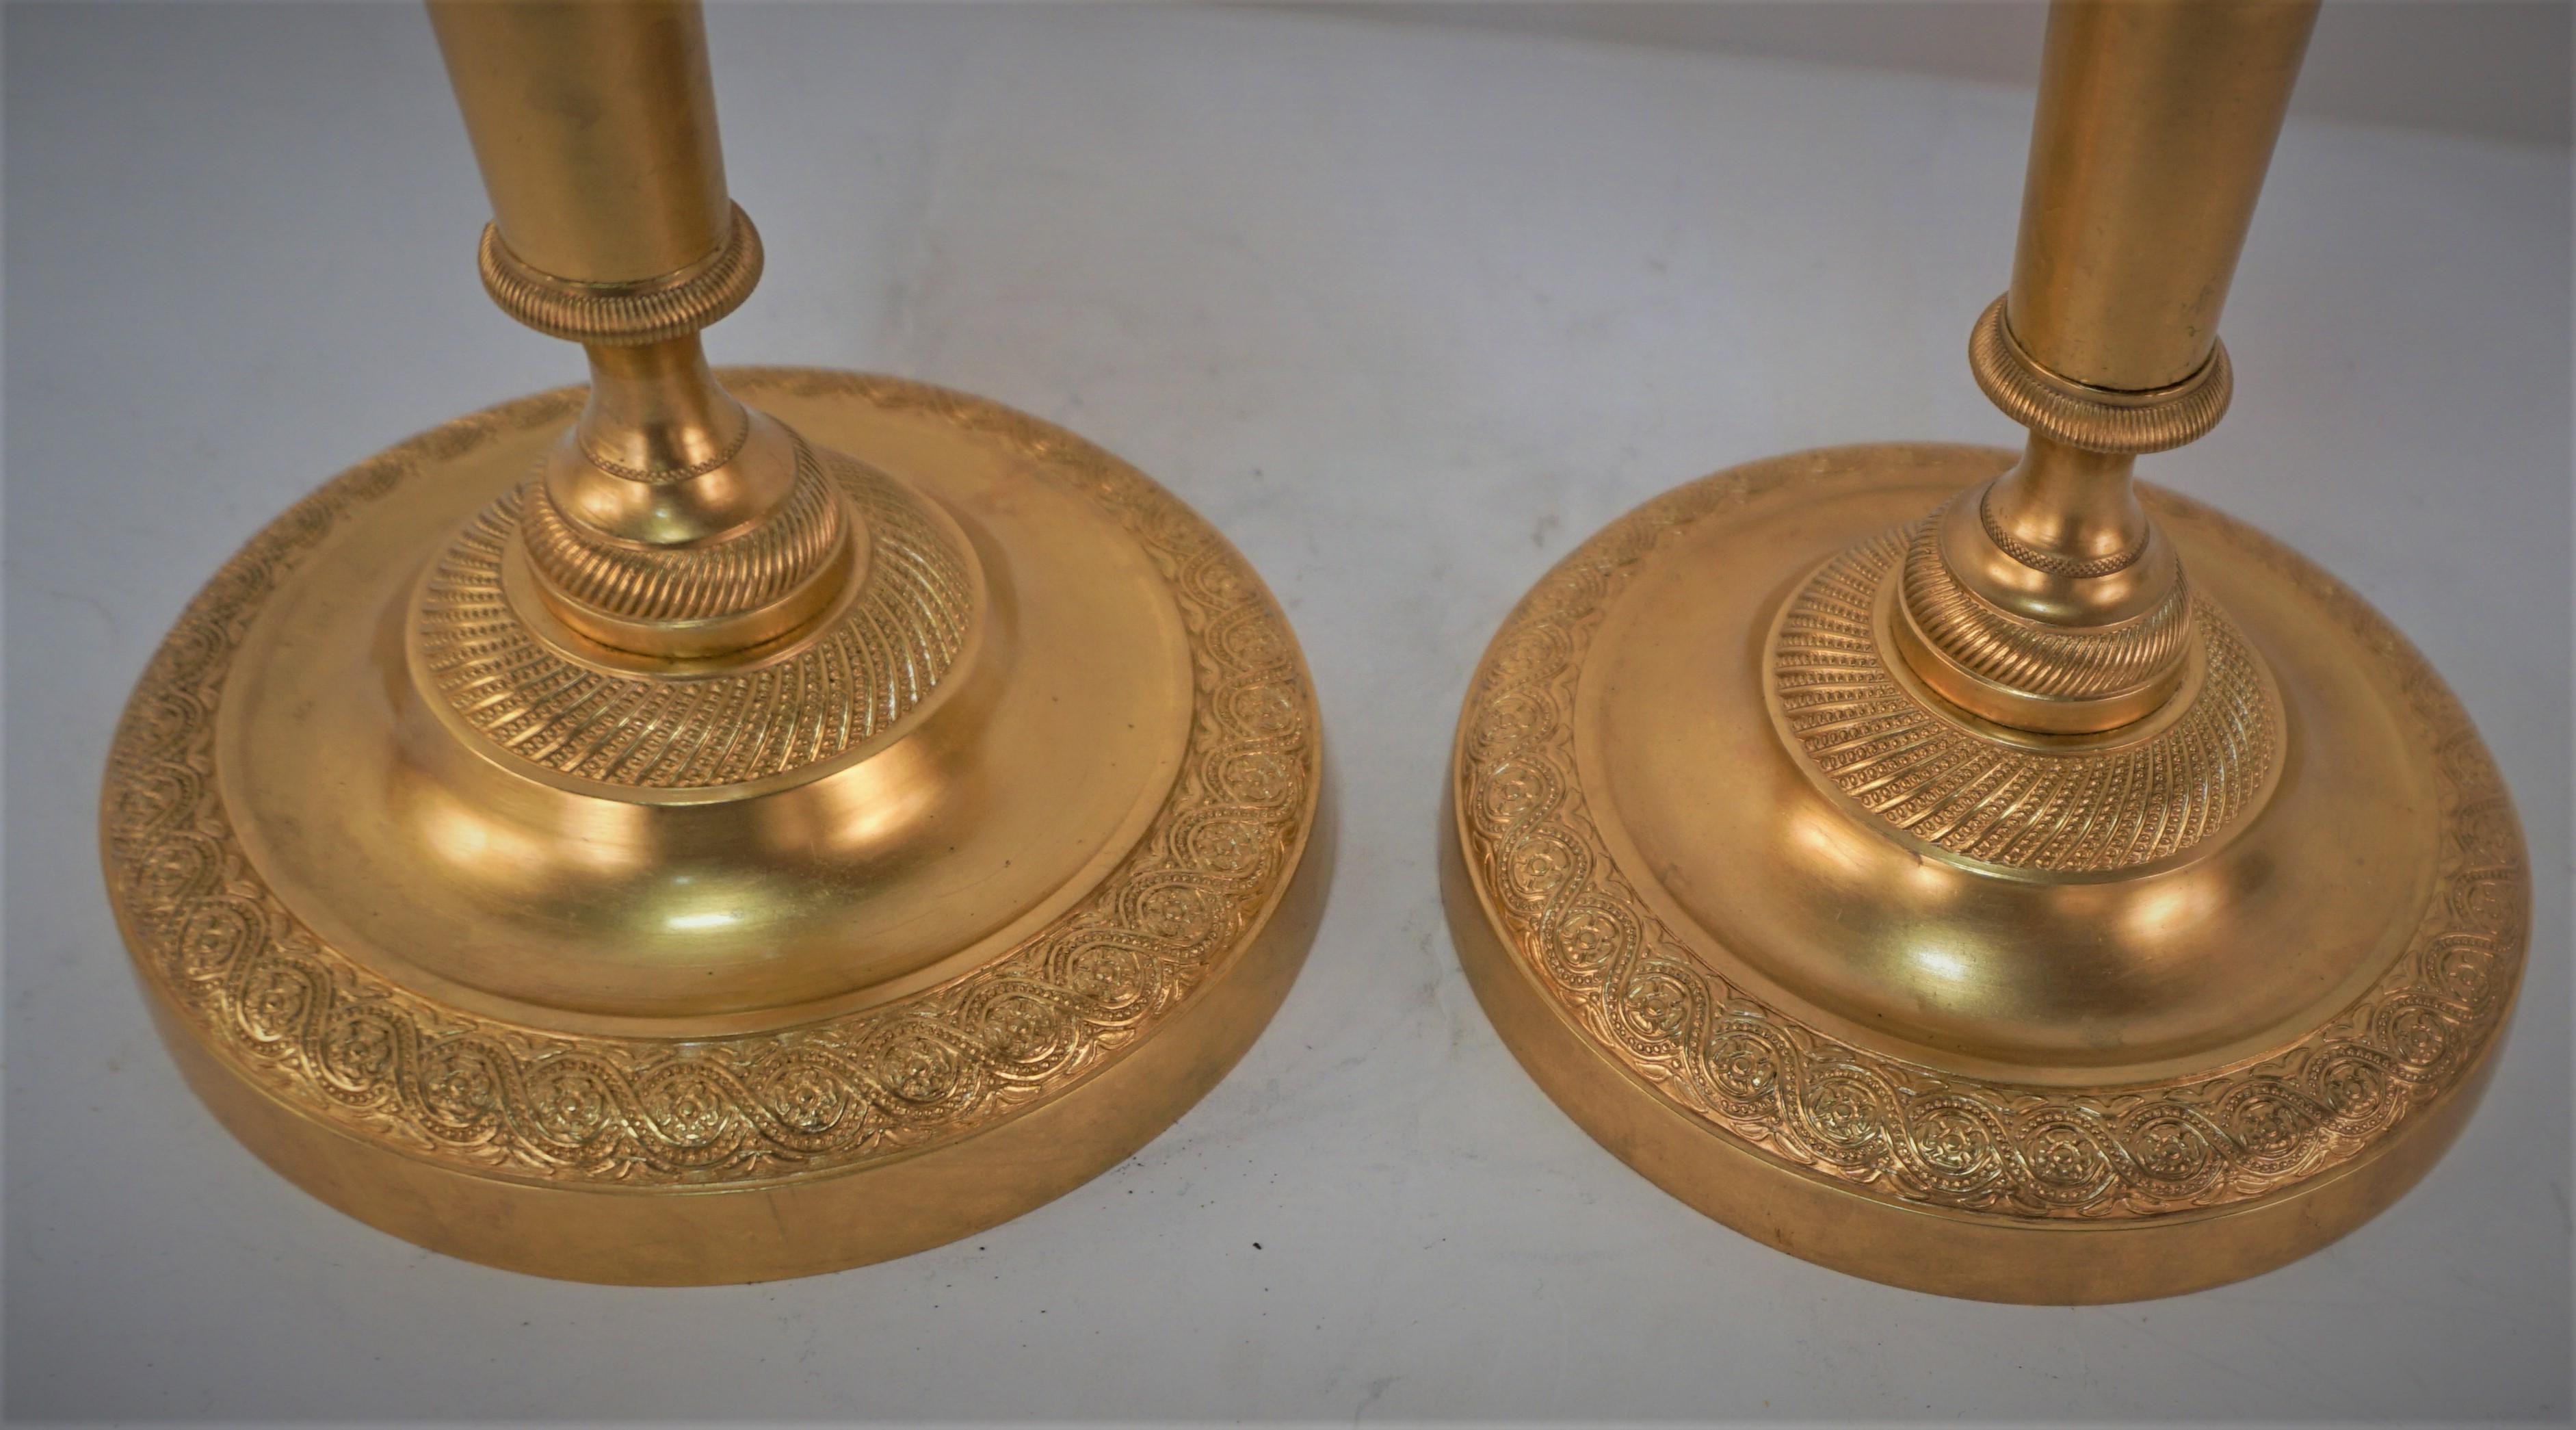 Pair of 19th Century French Gilt Bronze Candlesticks In Good Condition For Sale In Fairfax, VA